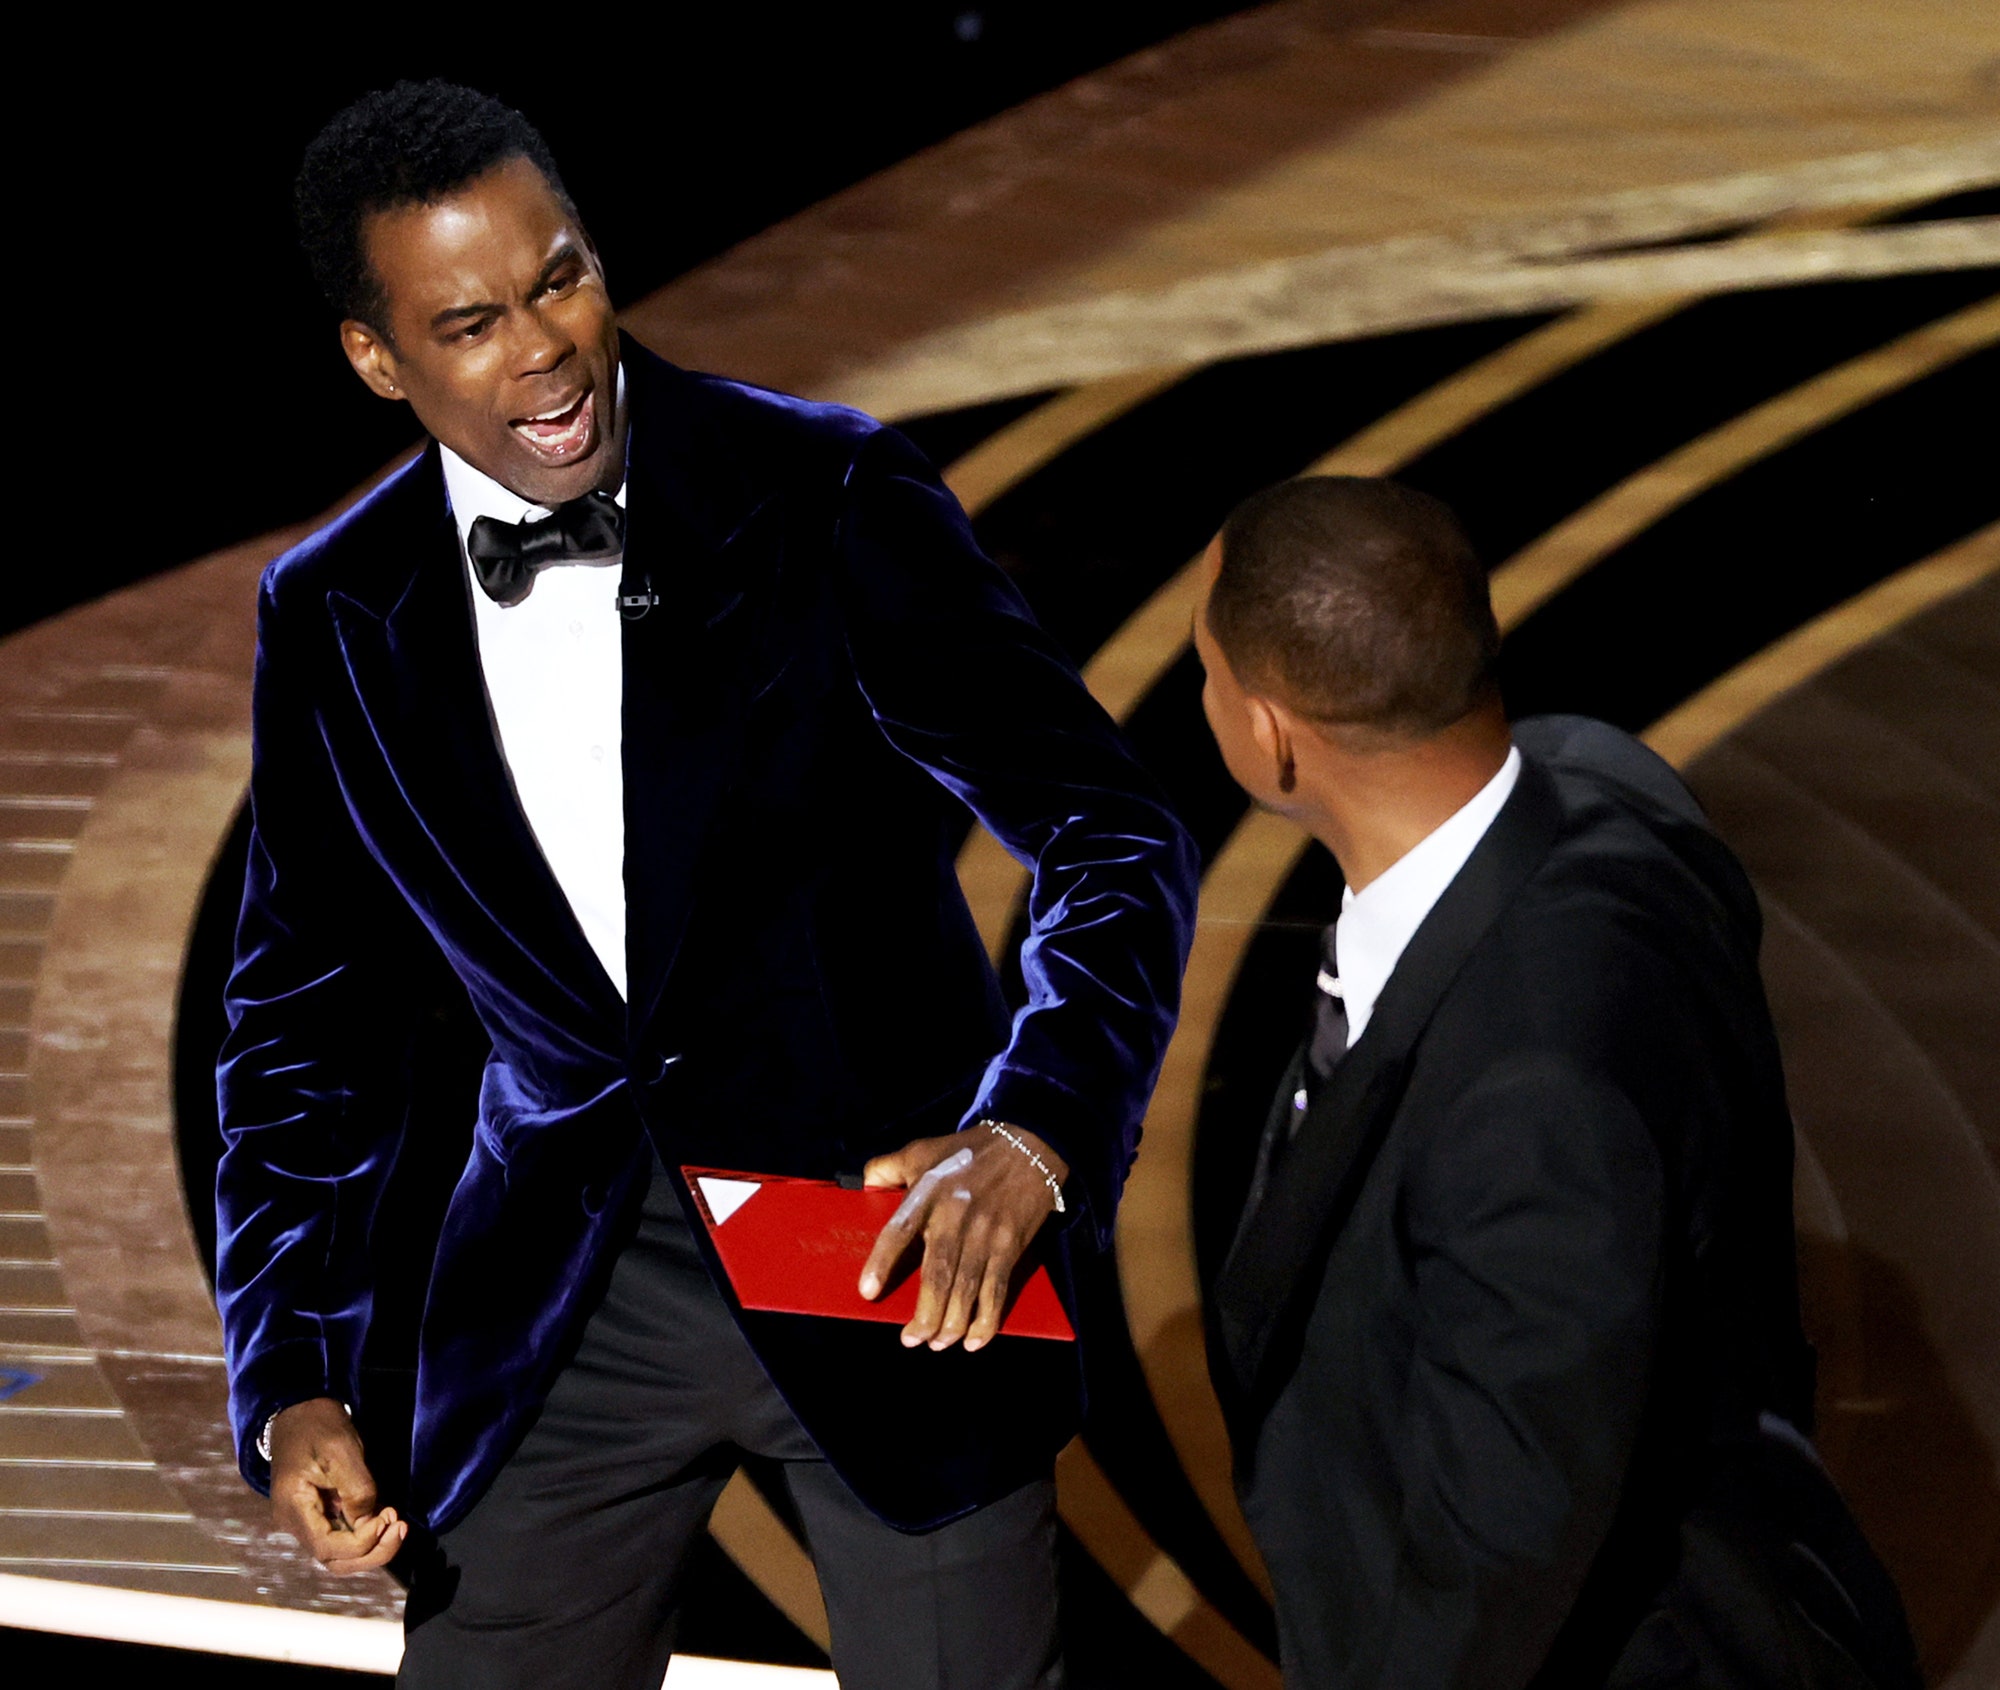 "But love will make you do crazy things"- Will Smith slaps Chris Rock at Oscars, wins Best Actor, Apologizes to the Academy.